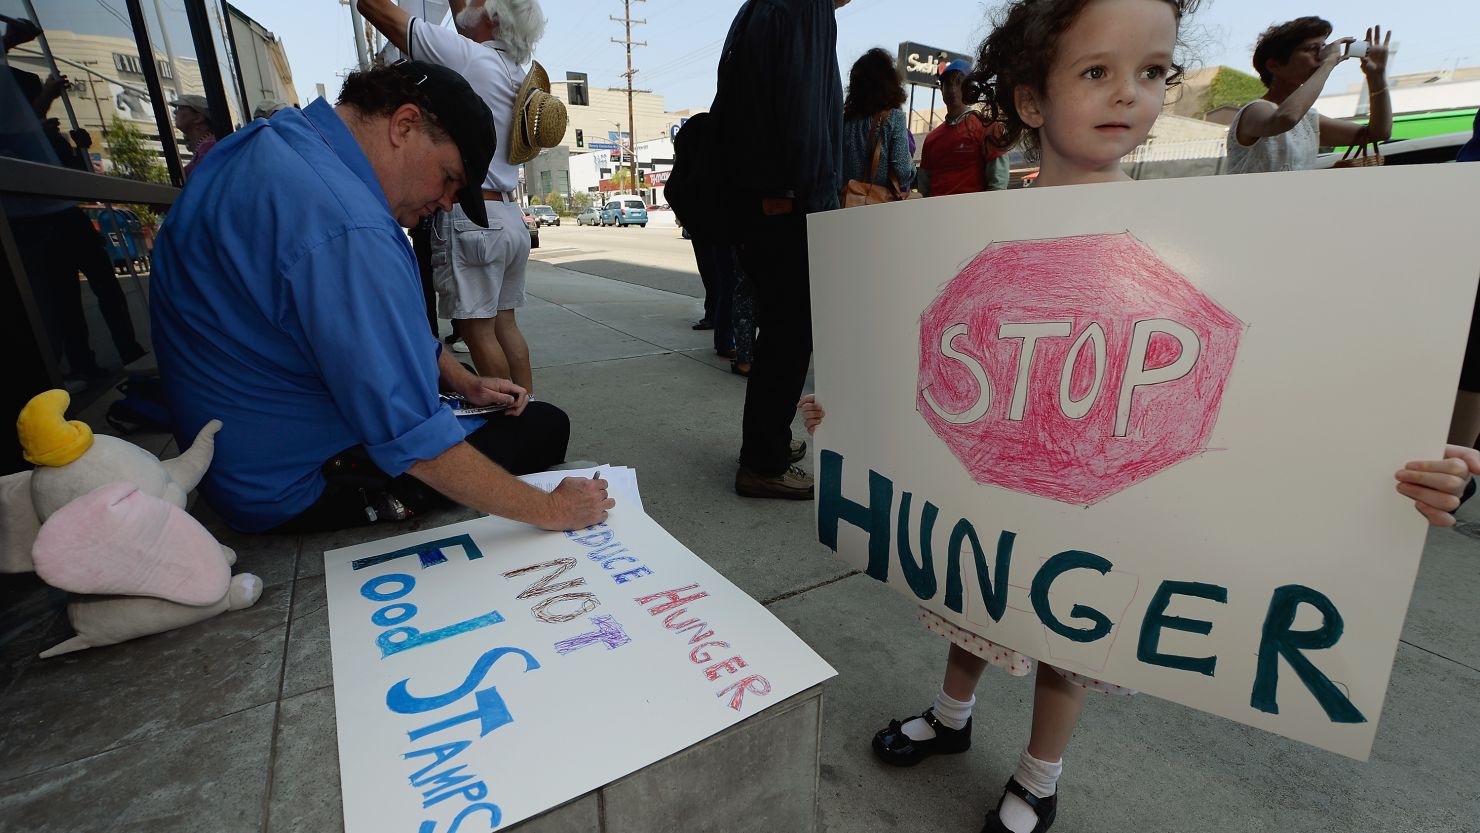 A girl  joins her father to protest a farm bill that would cut funding for SNAP, or the food stamp program.
